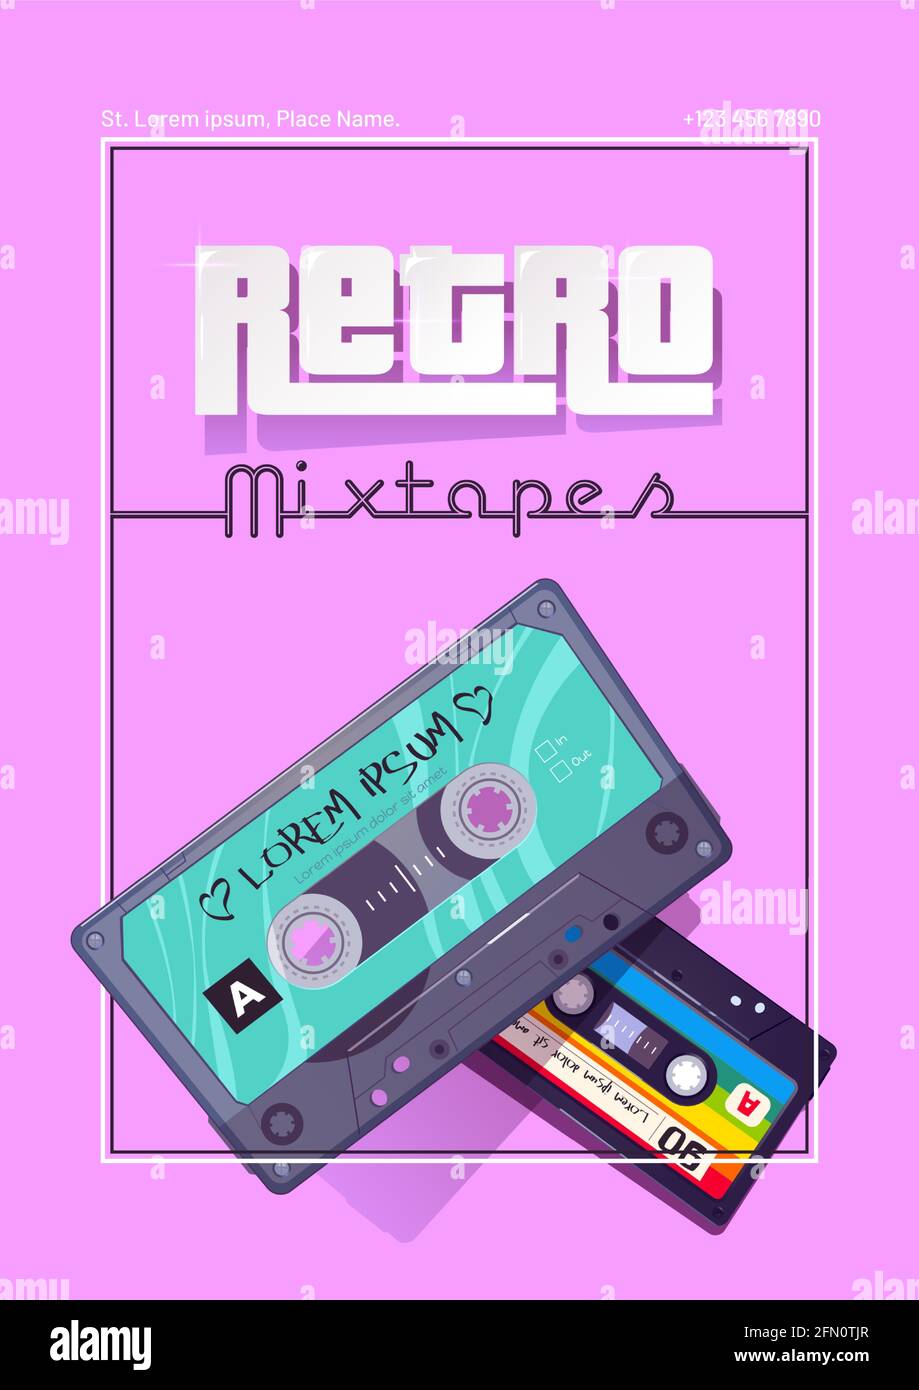 Retro mixtapes cartoon poster with audio cassettes, mix tapes, media storage for music and sound on pink background. Vintage style analog hipster devices of eighties ages culture, Vector illustration Stock Vector